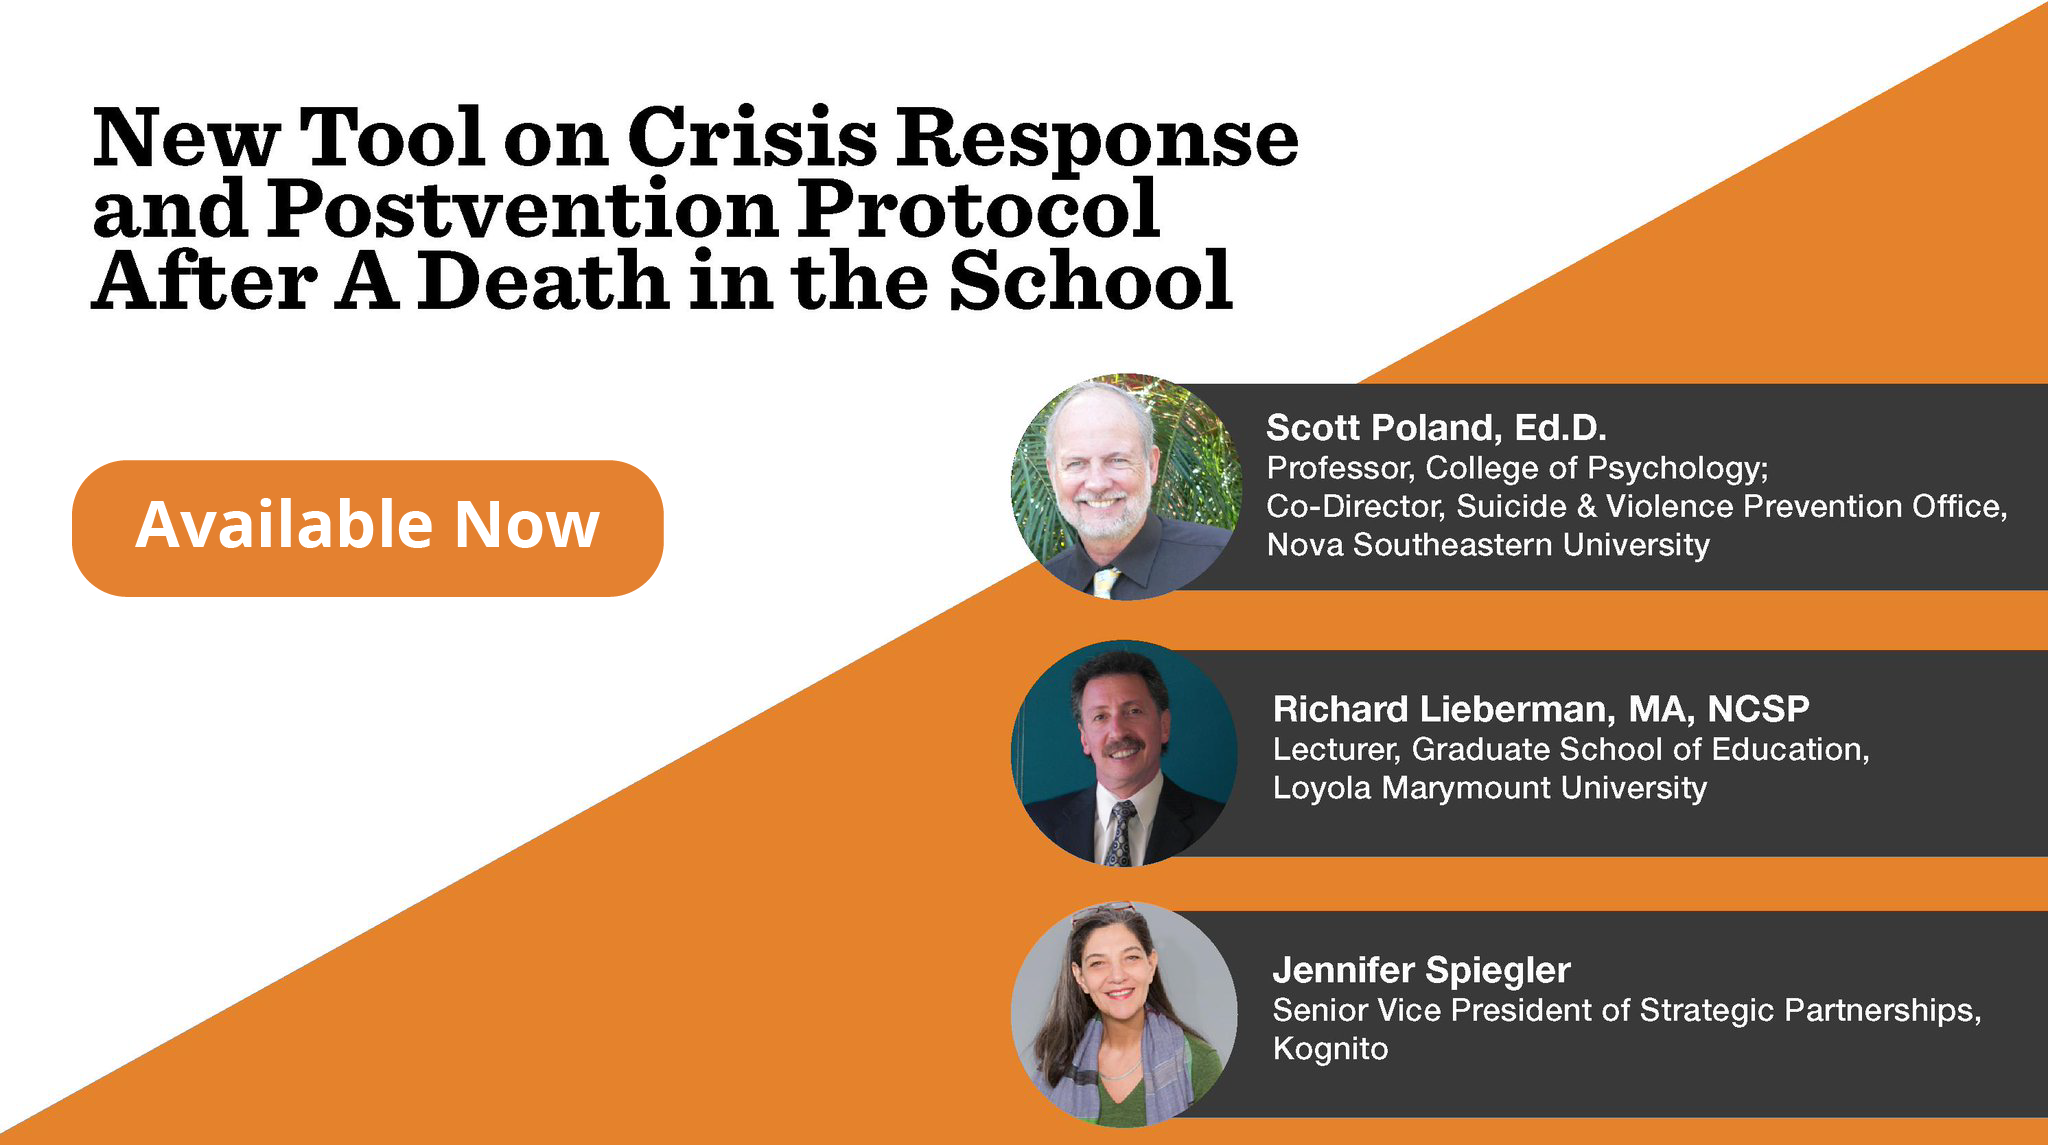 New Tool on Crisis Response and Postvention Protocol After a Death in the School